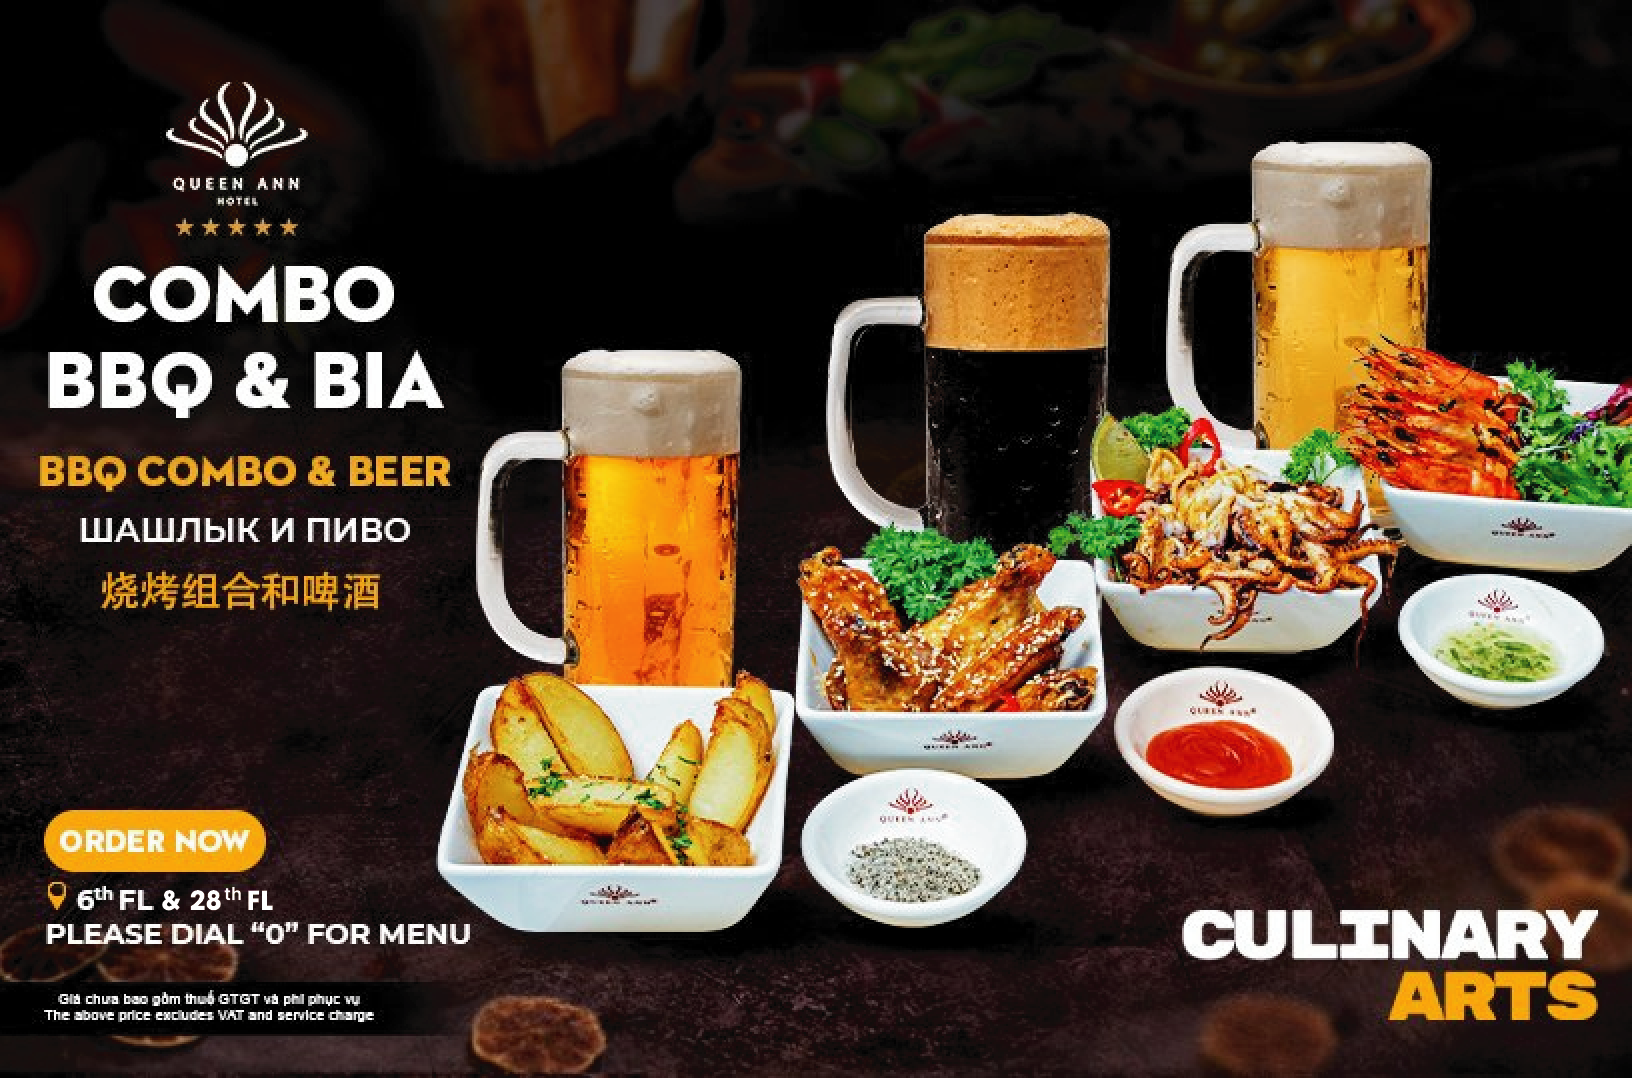 EXPLORE THE COASTAL CULINARY RHYTHMS WITH THE SPECIAL COMBO OF BBQ AND FRESH BEER